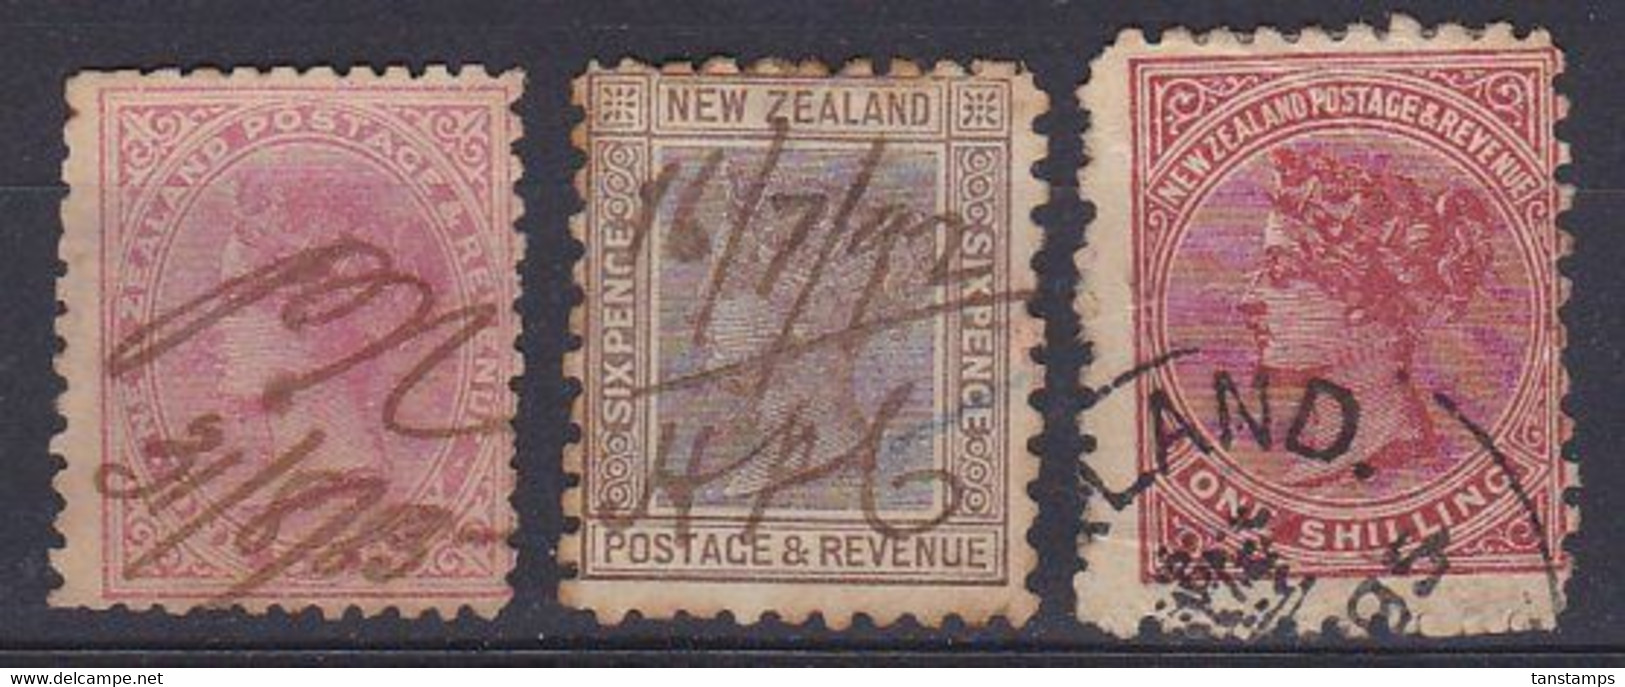 QUEEN VICTORIA 3 X SSF REVENUE USE - Postal Fiscal Stamps